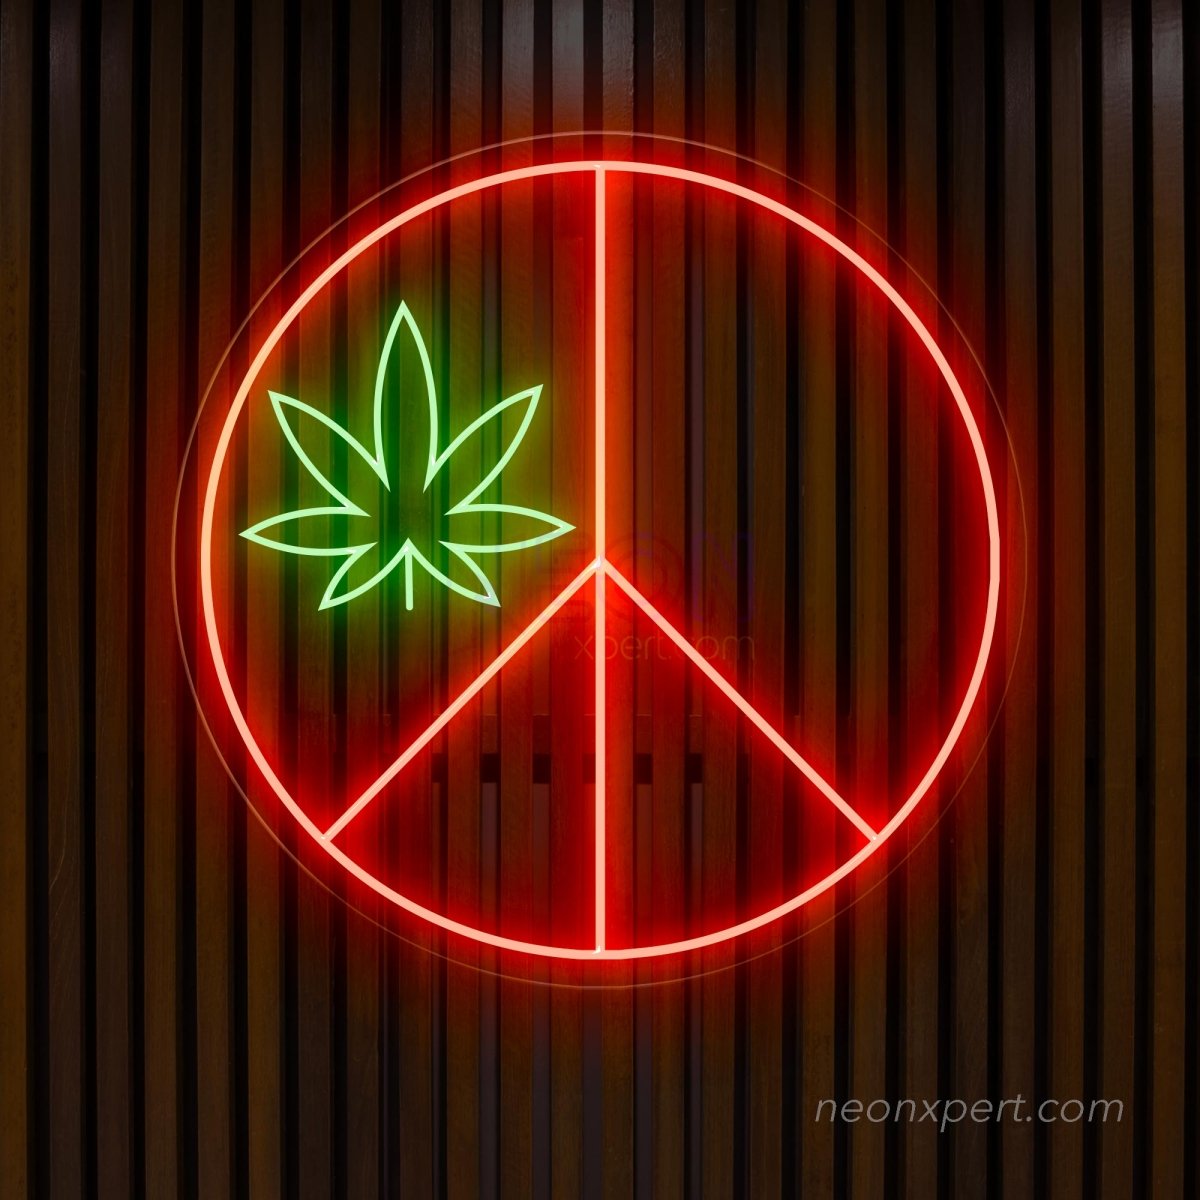 Weed Peace Symbol LED Neon Light – Relaxing Decor - NeonXpert